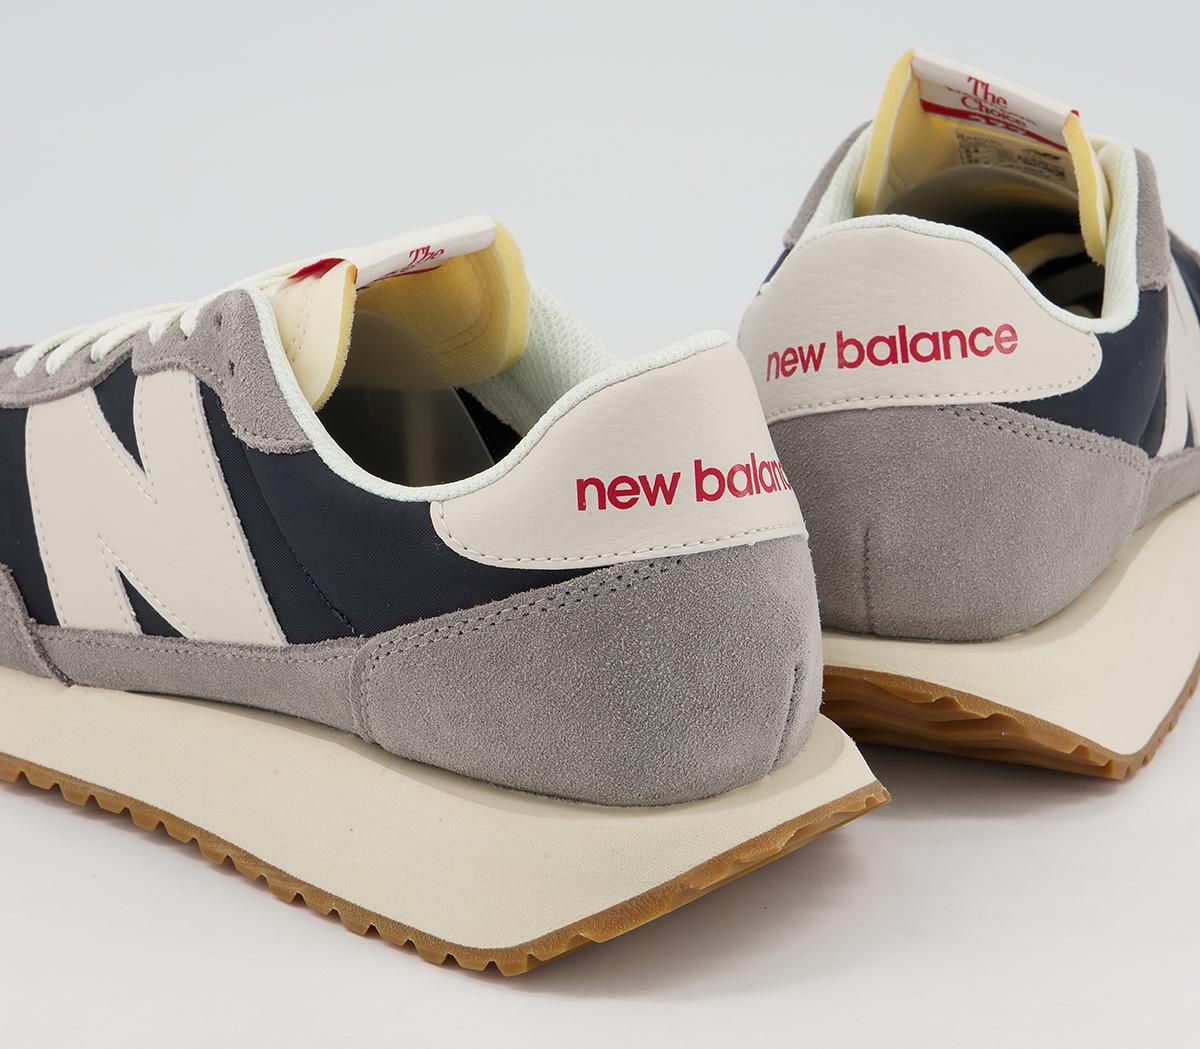 New Balance Ms237 Trainers Marblehead - Unisex Sports